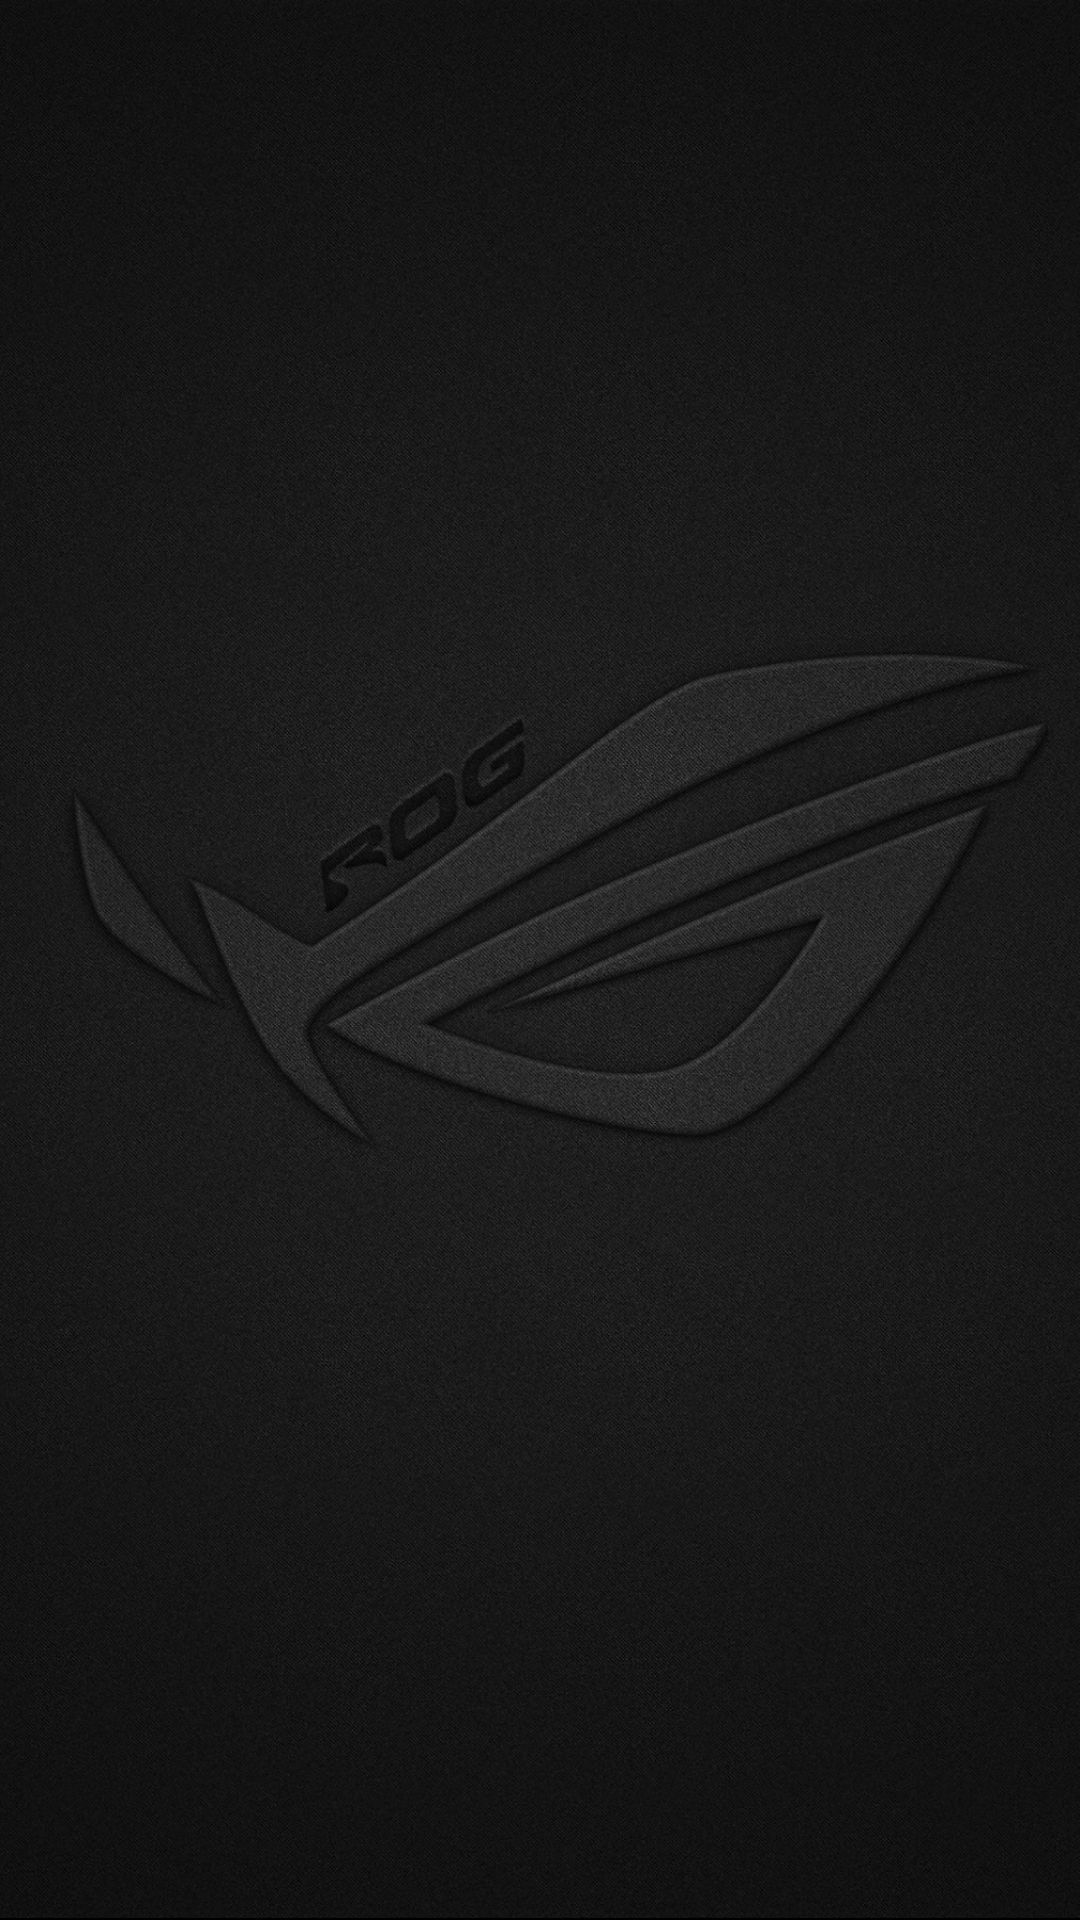 Asus iPhone Wallpaper Free Asus iPhone Background